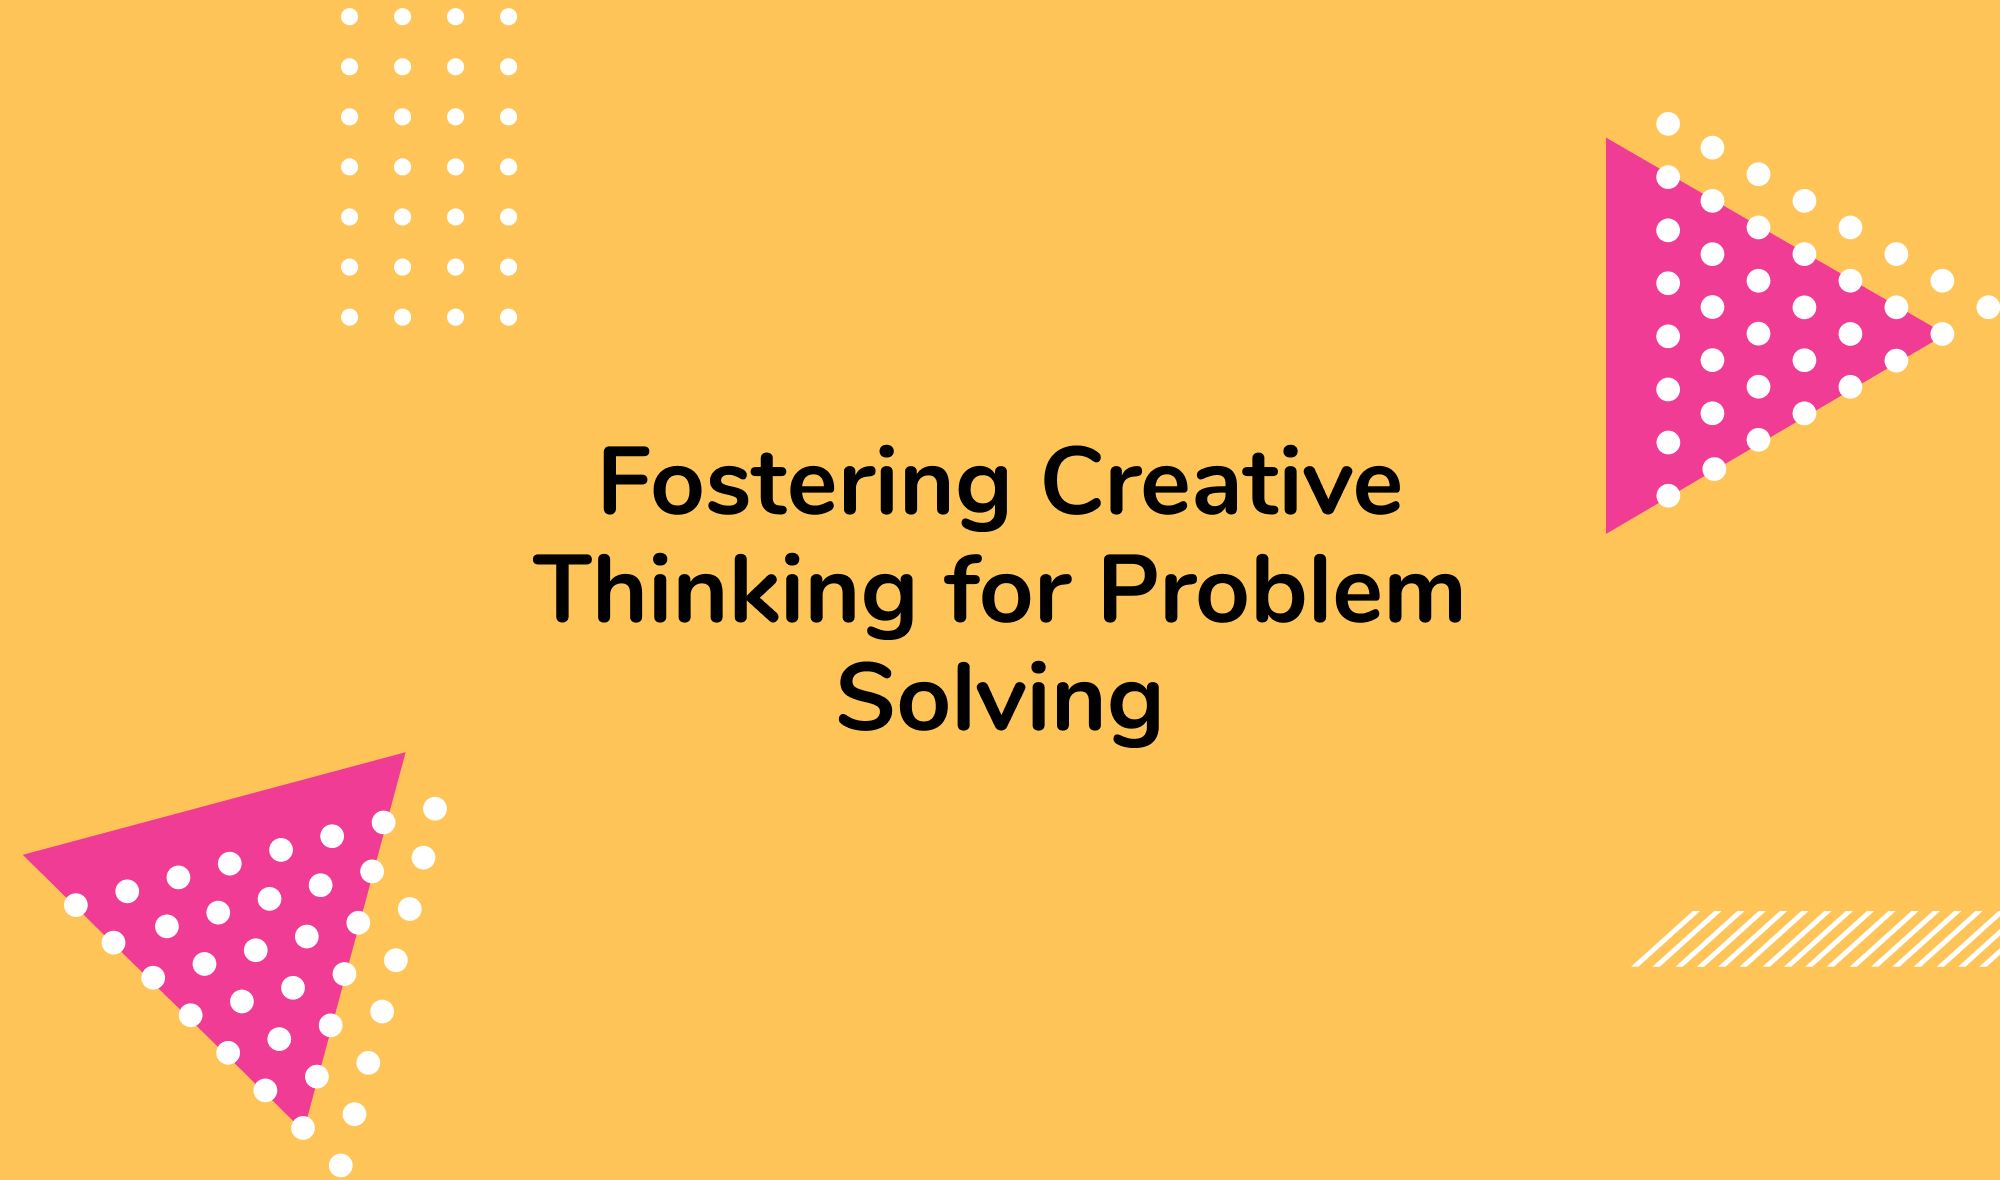 Fostering Creative Thinking for Problem Solving